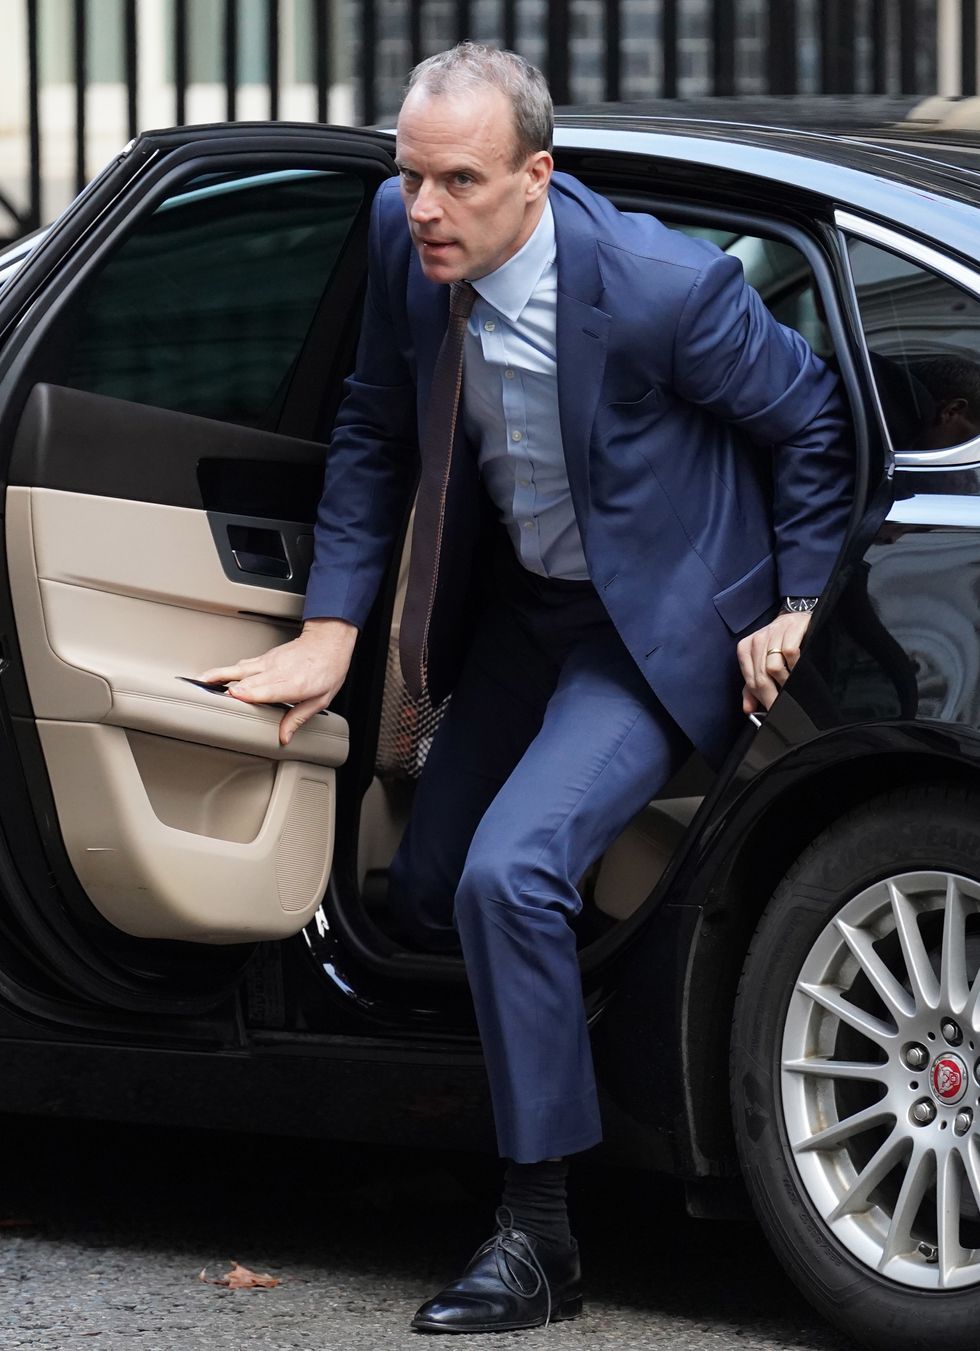 Deputy Prime Minister Dominic Raab arrives in Downing Street, London, ahead of a Cabinet meeting. Picture date: Tuesday November 22, 2022.